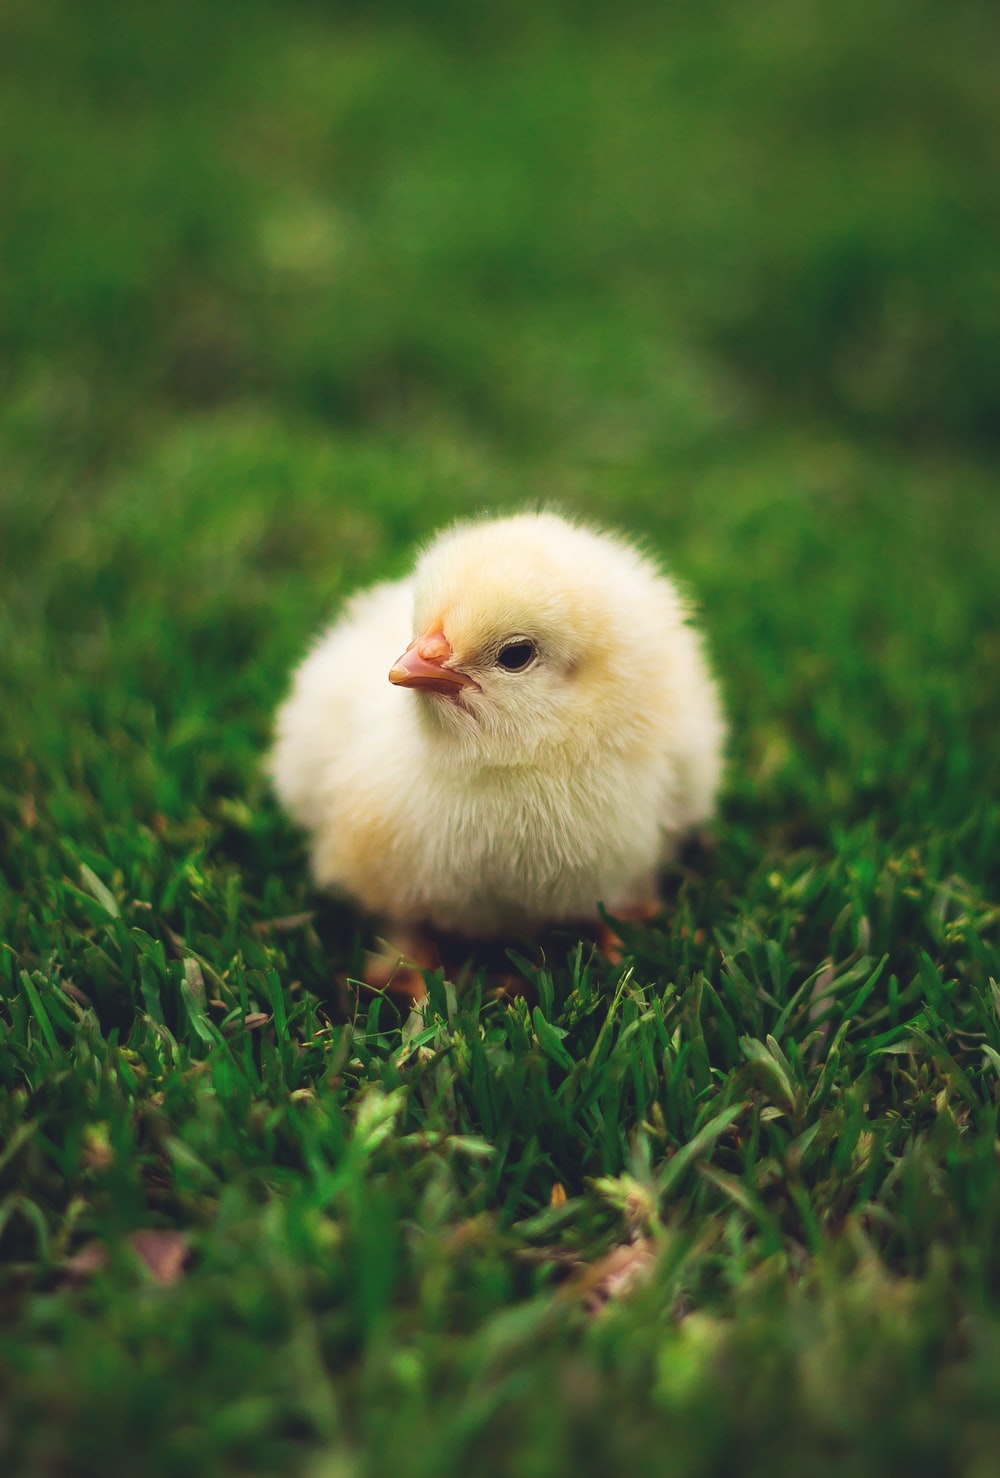 Baby Chicken Picture. Download Free Image